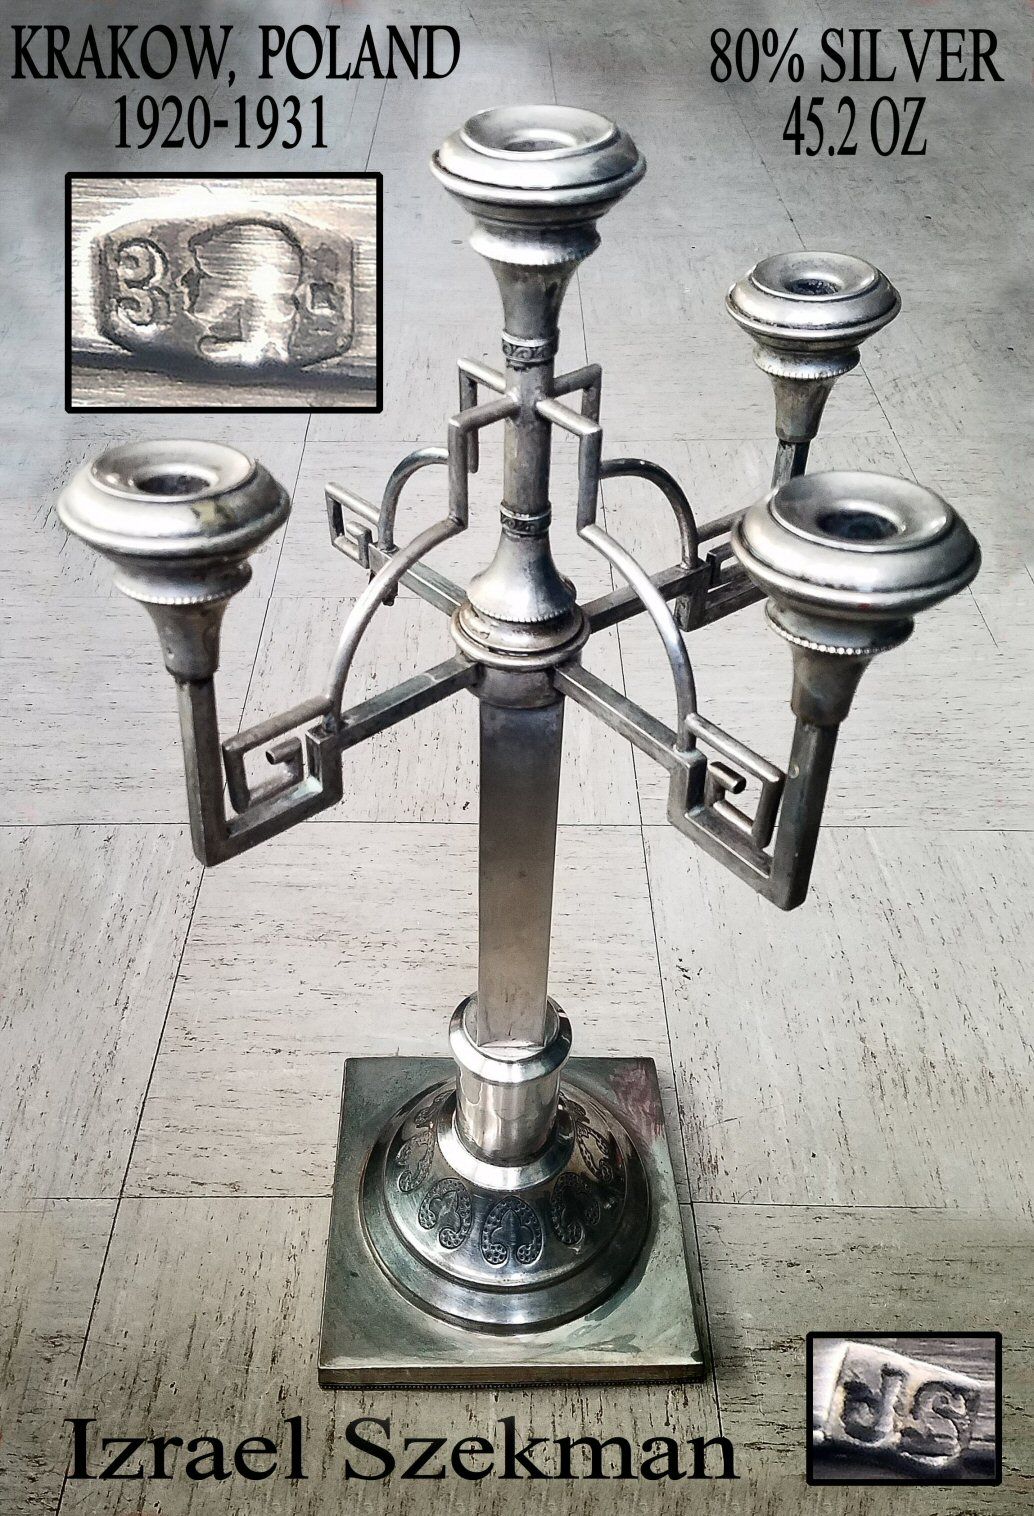 This is a huge 2-foot-tall candelabra. Made in Krakow, Poland in between the years 1920-1931. It is 80% pure silver and weighs 45.2 ounces. The man wh